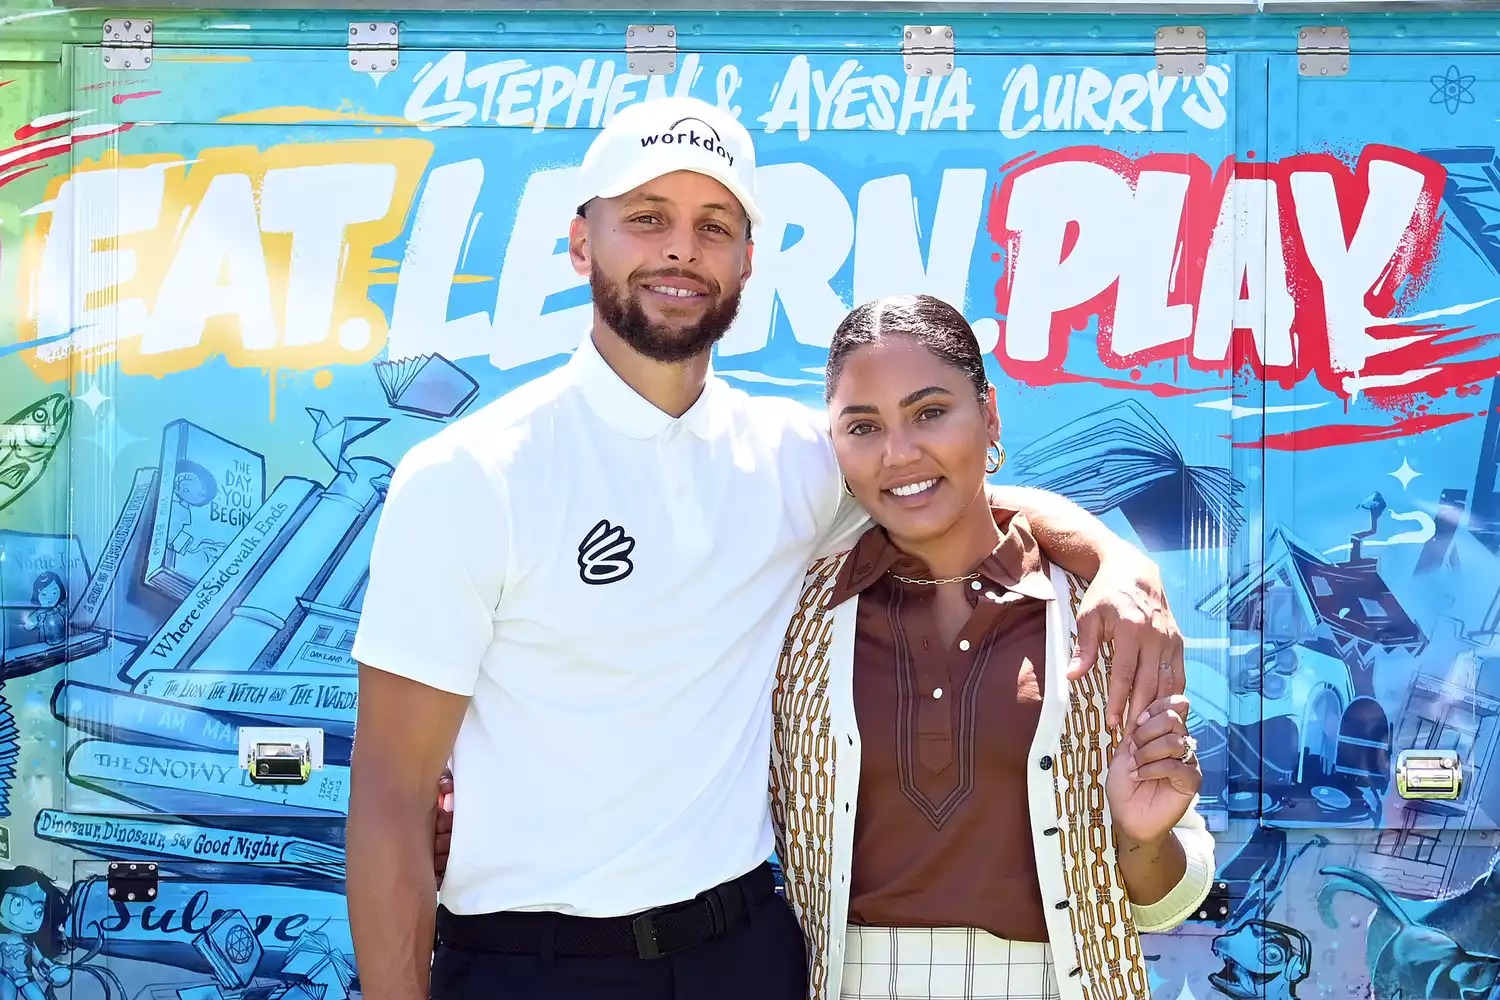 likhoa little known things about the family stephen curry and ayesha have always been the hottest couple in the basketball world over the past years 6551f78d07144 Little Known Things About The Family Stephen Curry And Ayesha Have Always Been The Hottest Couple In The Basketball World Over The Past 20 Years